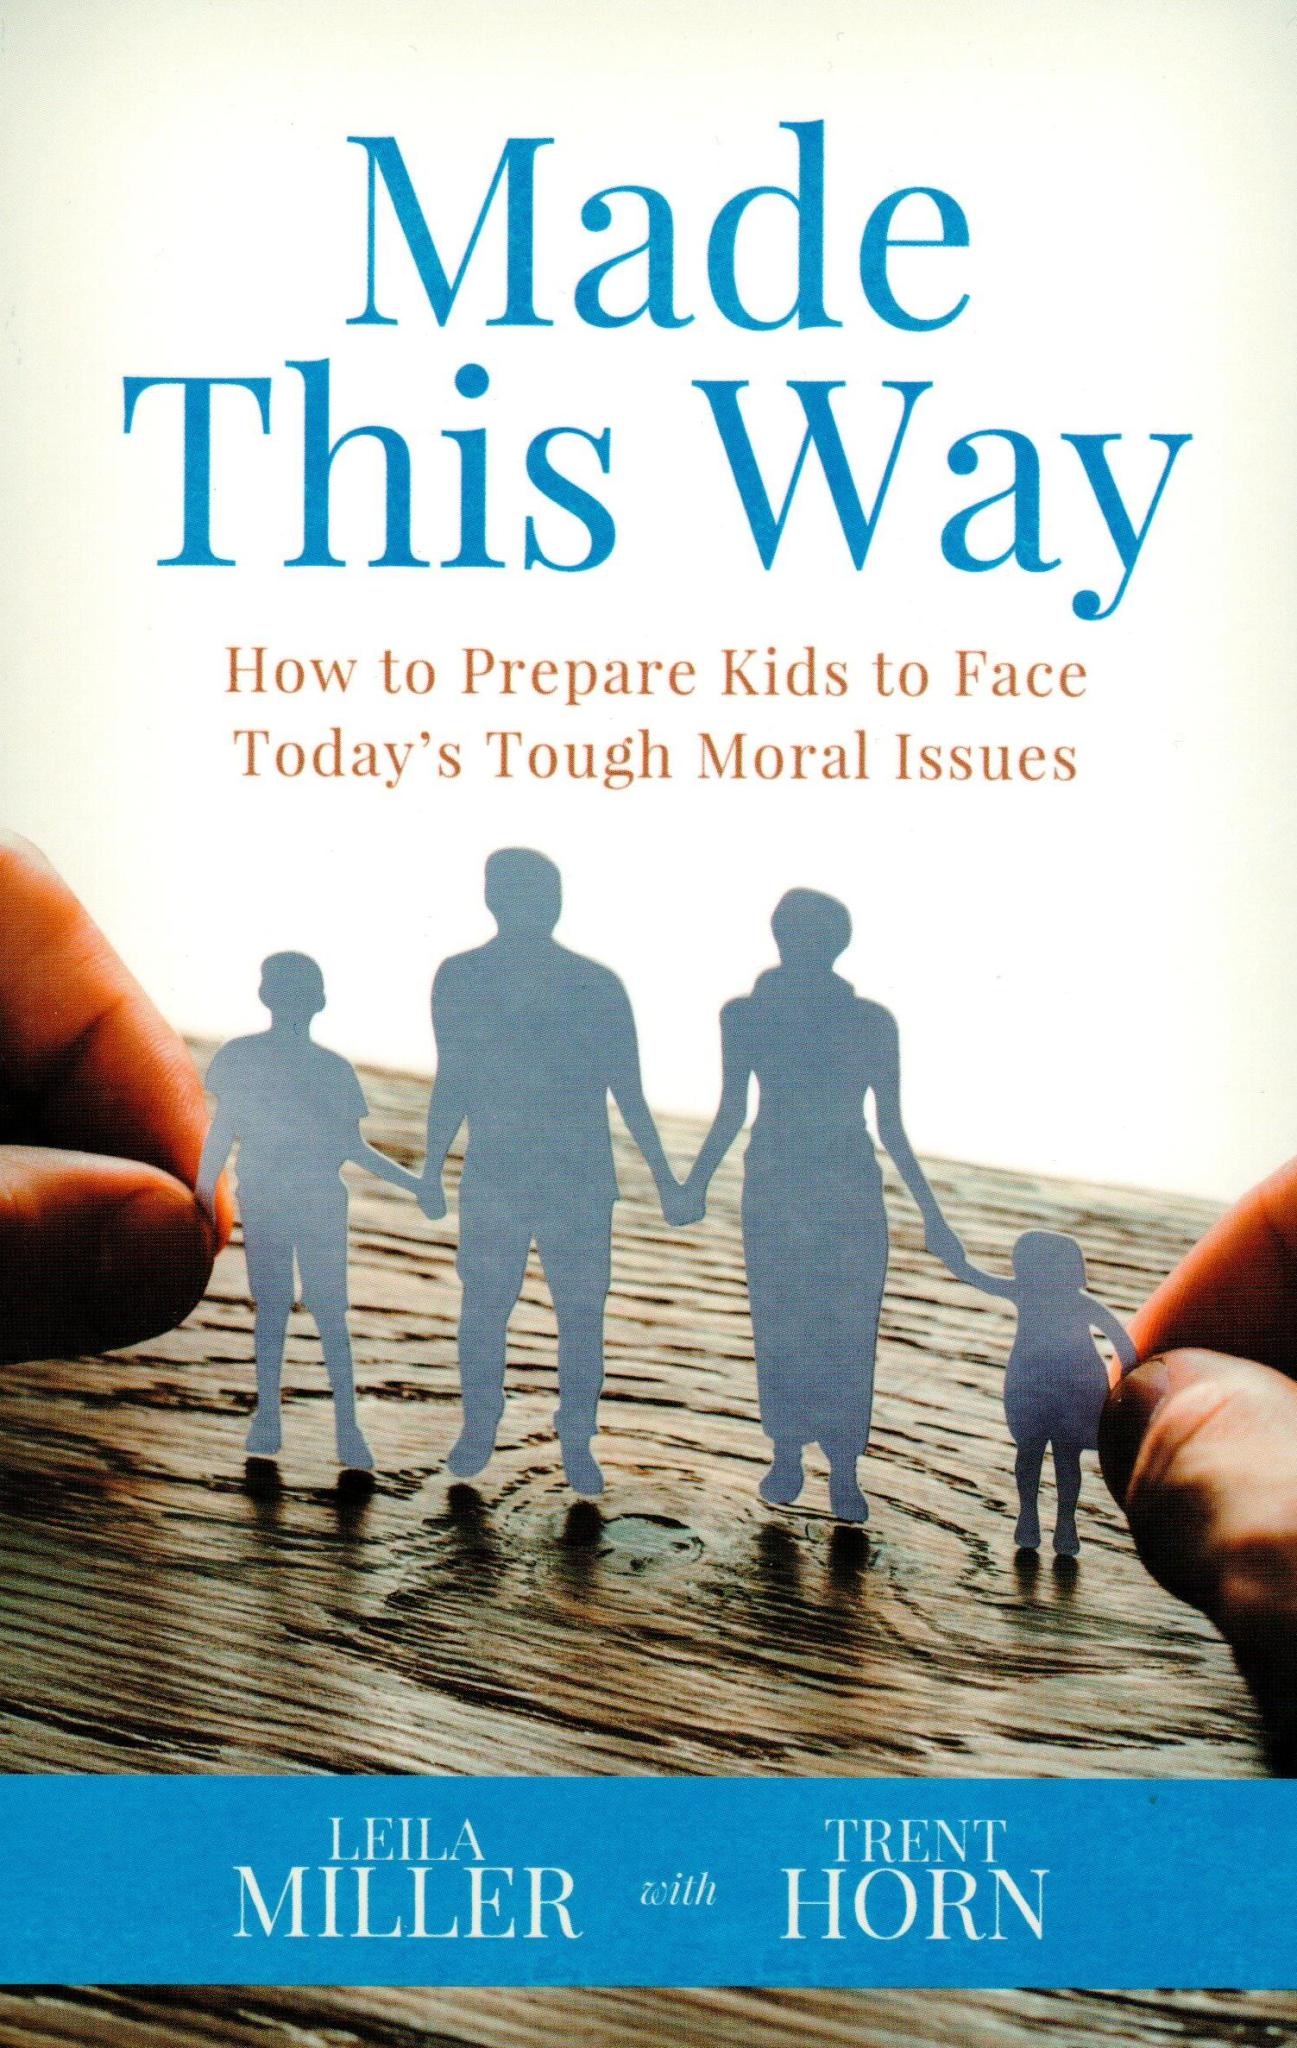 Made This Way: How to Prepare Kids to Face Today's Tough Moral Issues